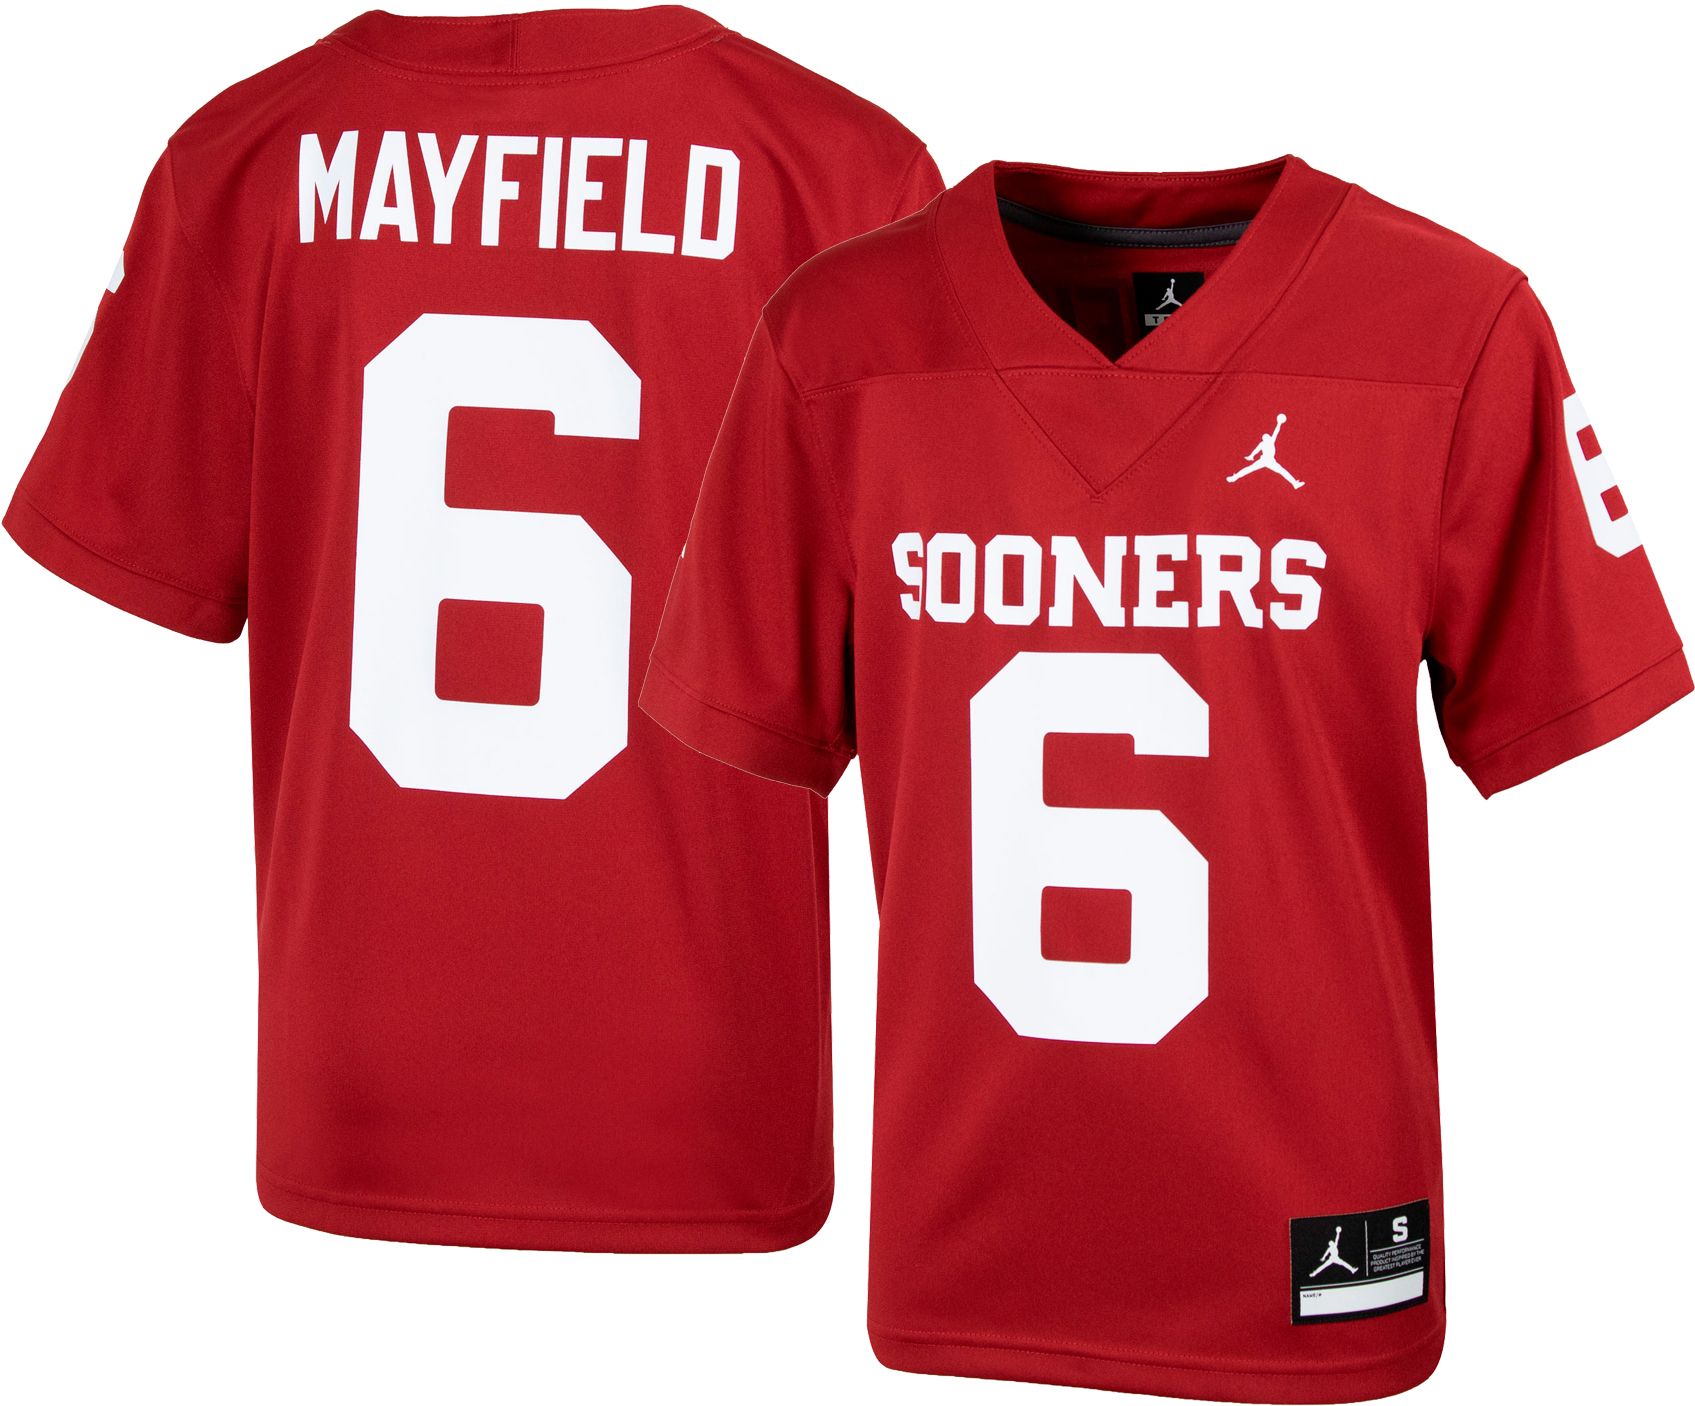 ou sooners jersey